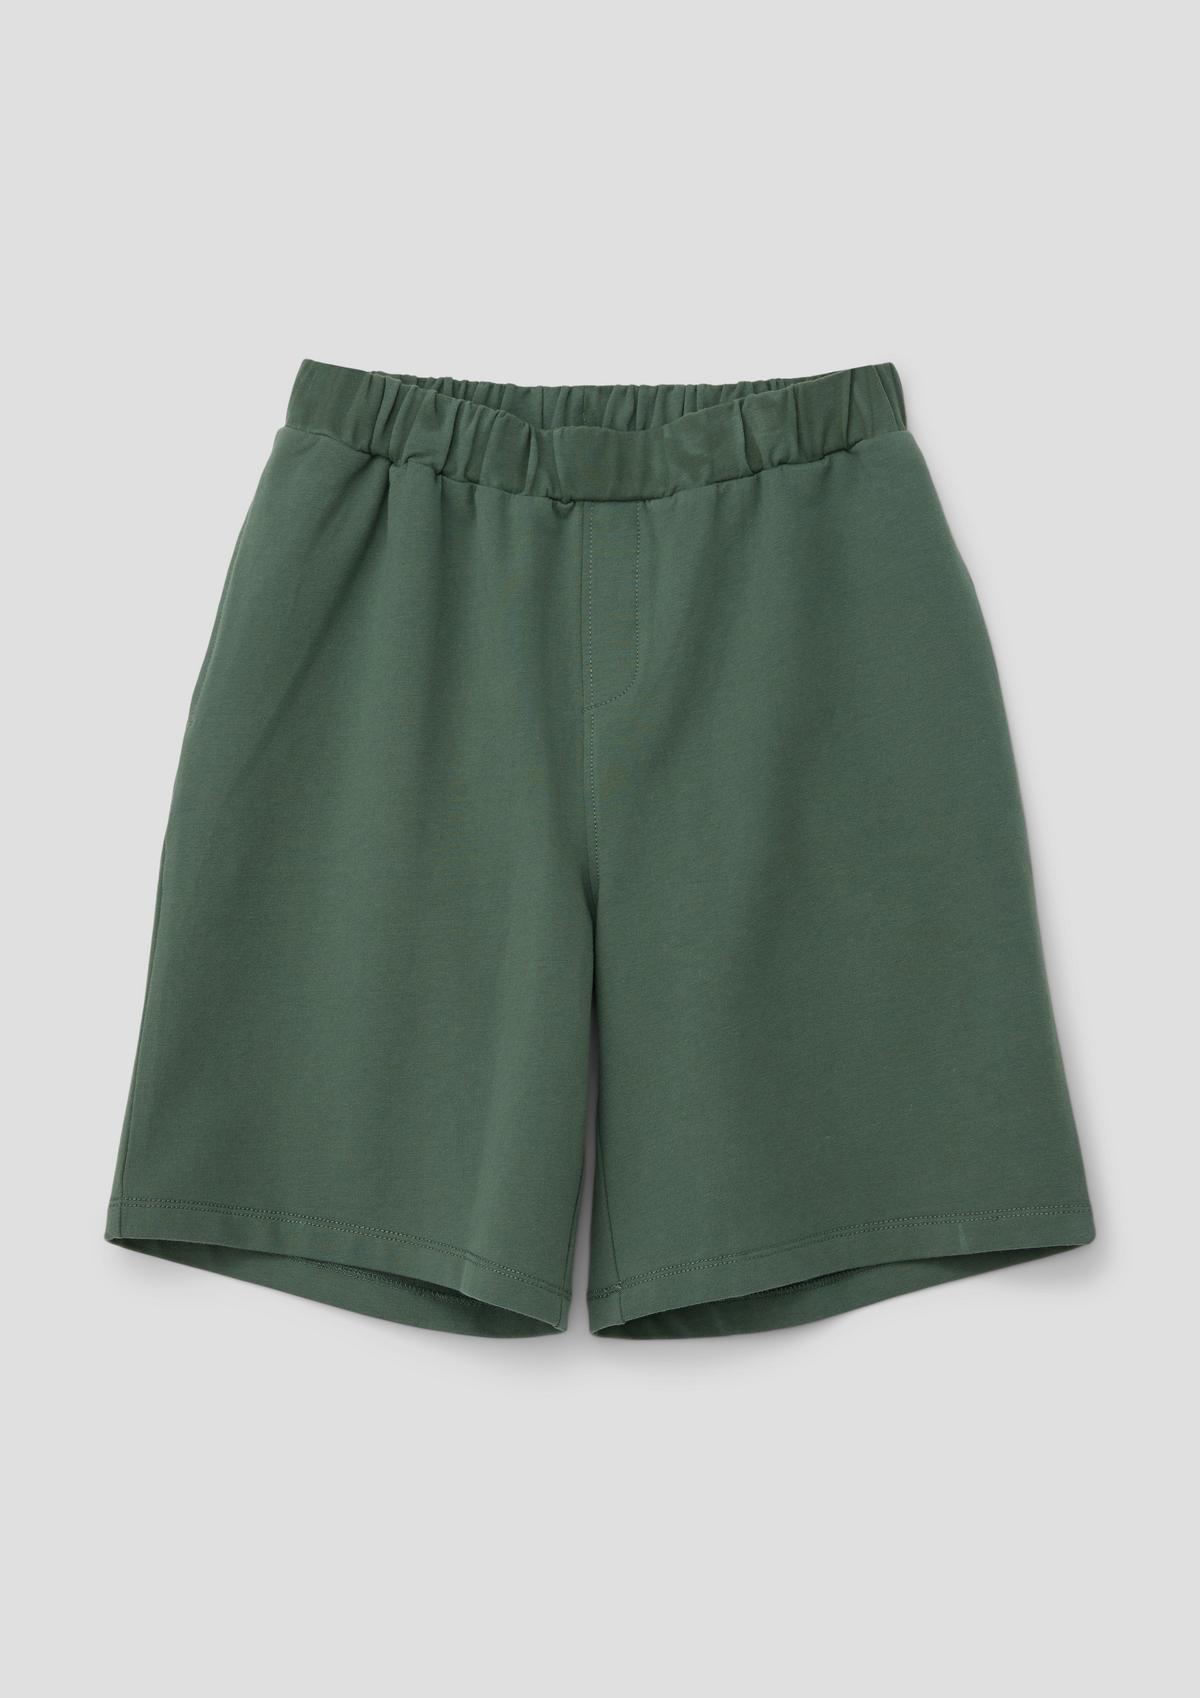 Find Bermuda shorts for boys and teens online | s.Oliver